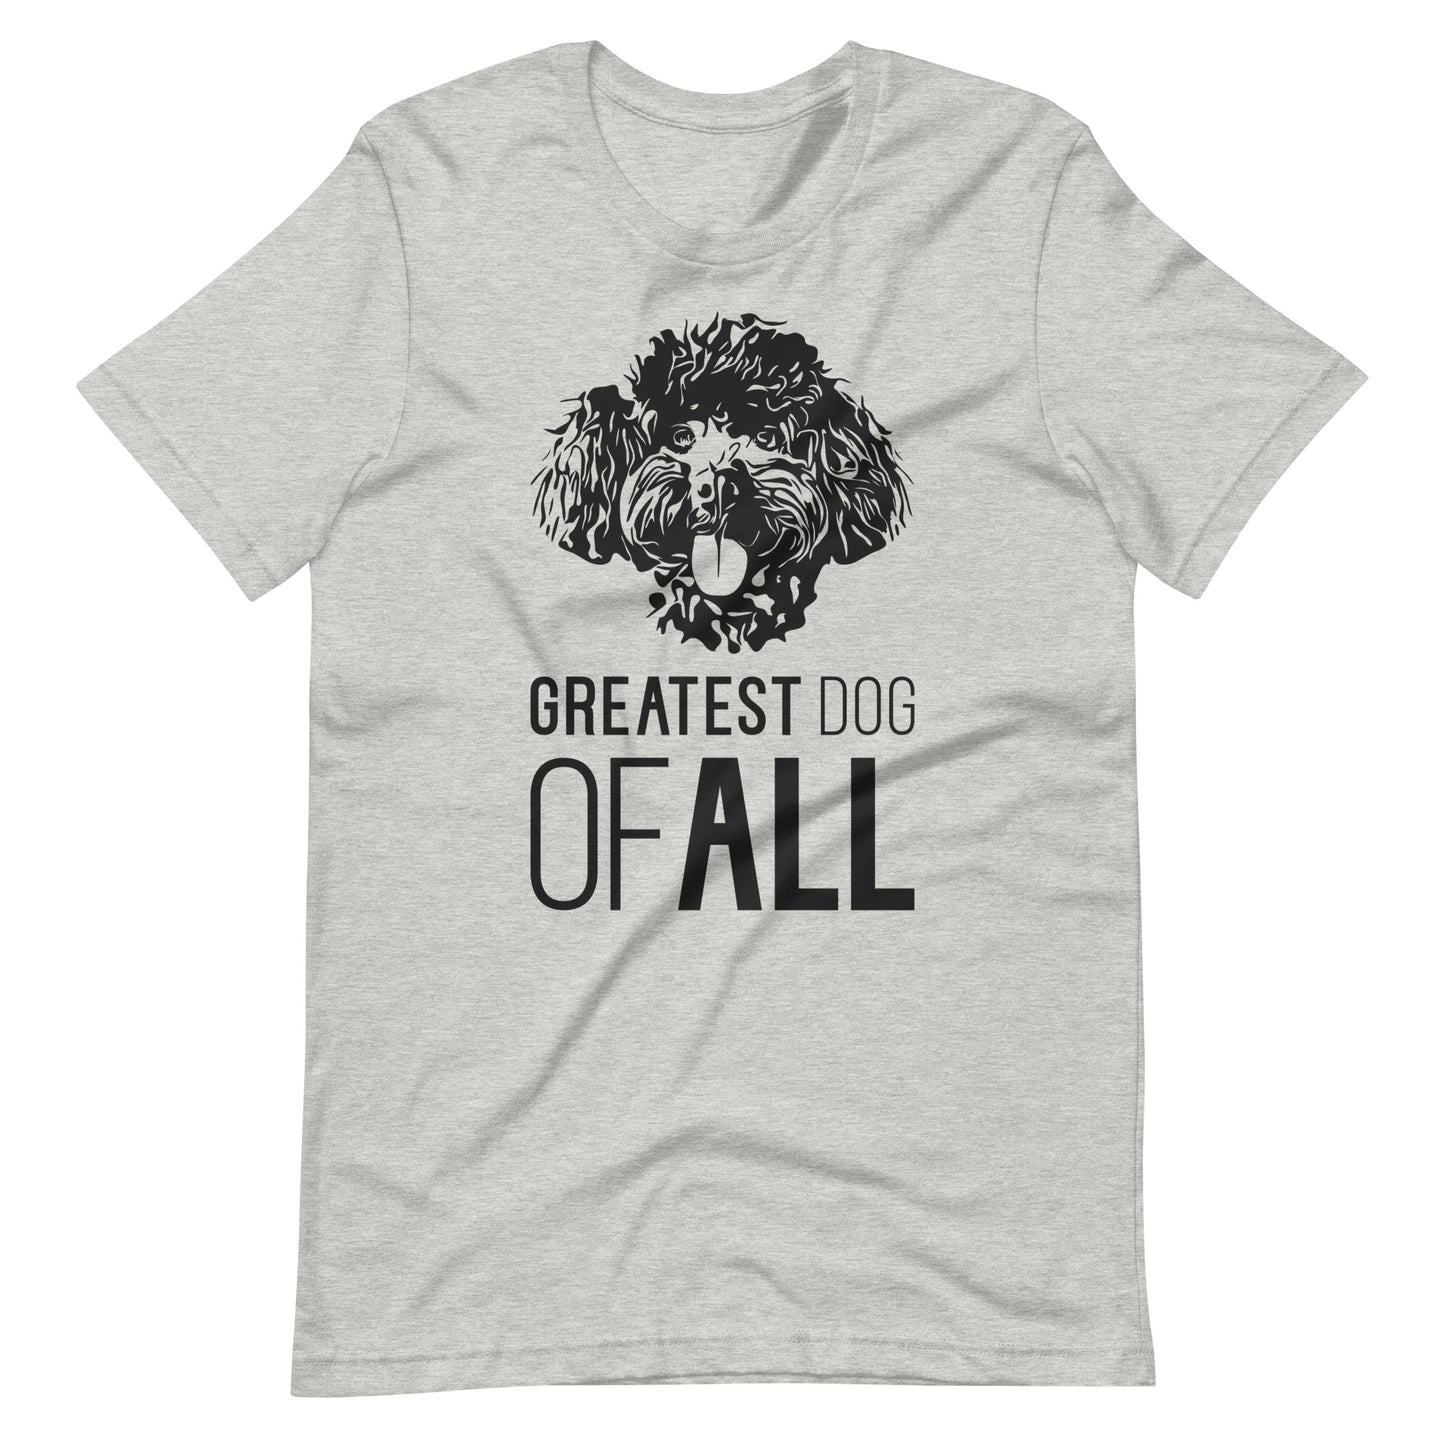 Black Toy Poodle face silhouette with Greatest Dog of All caption on unisex athletic heather t-shirt